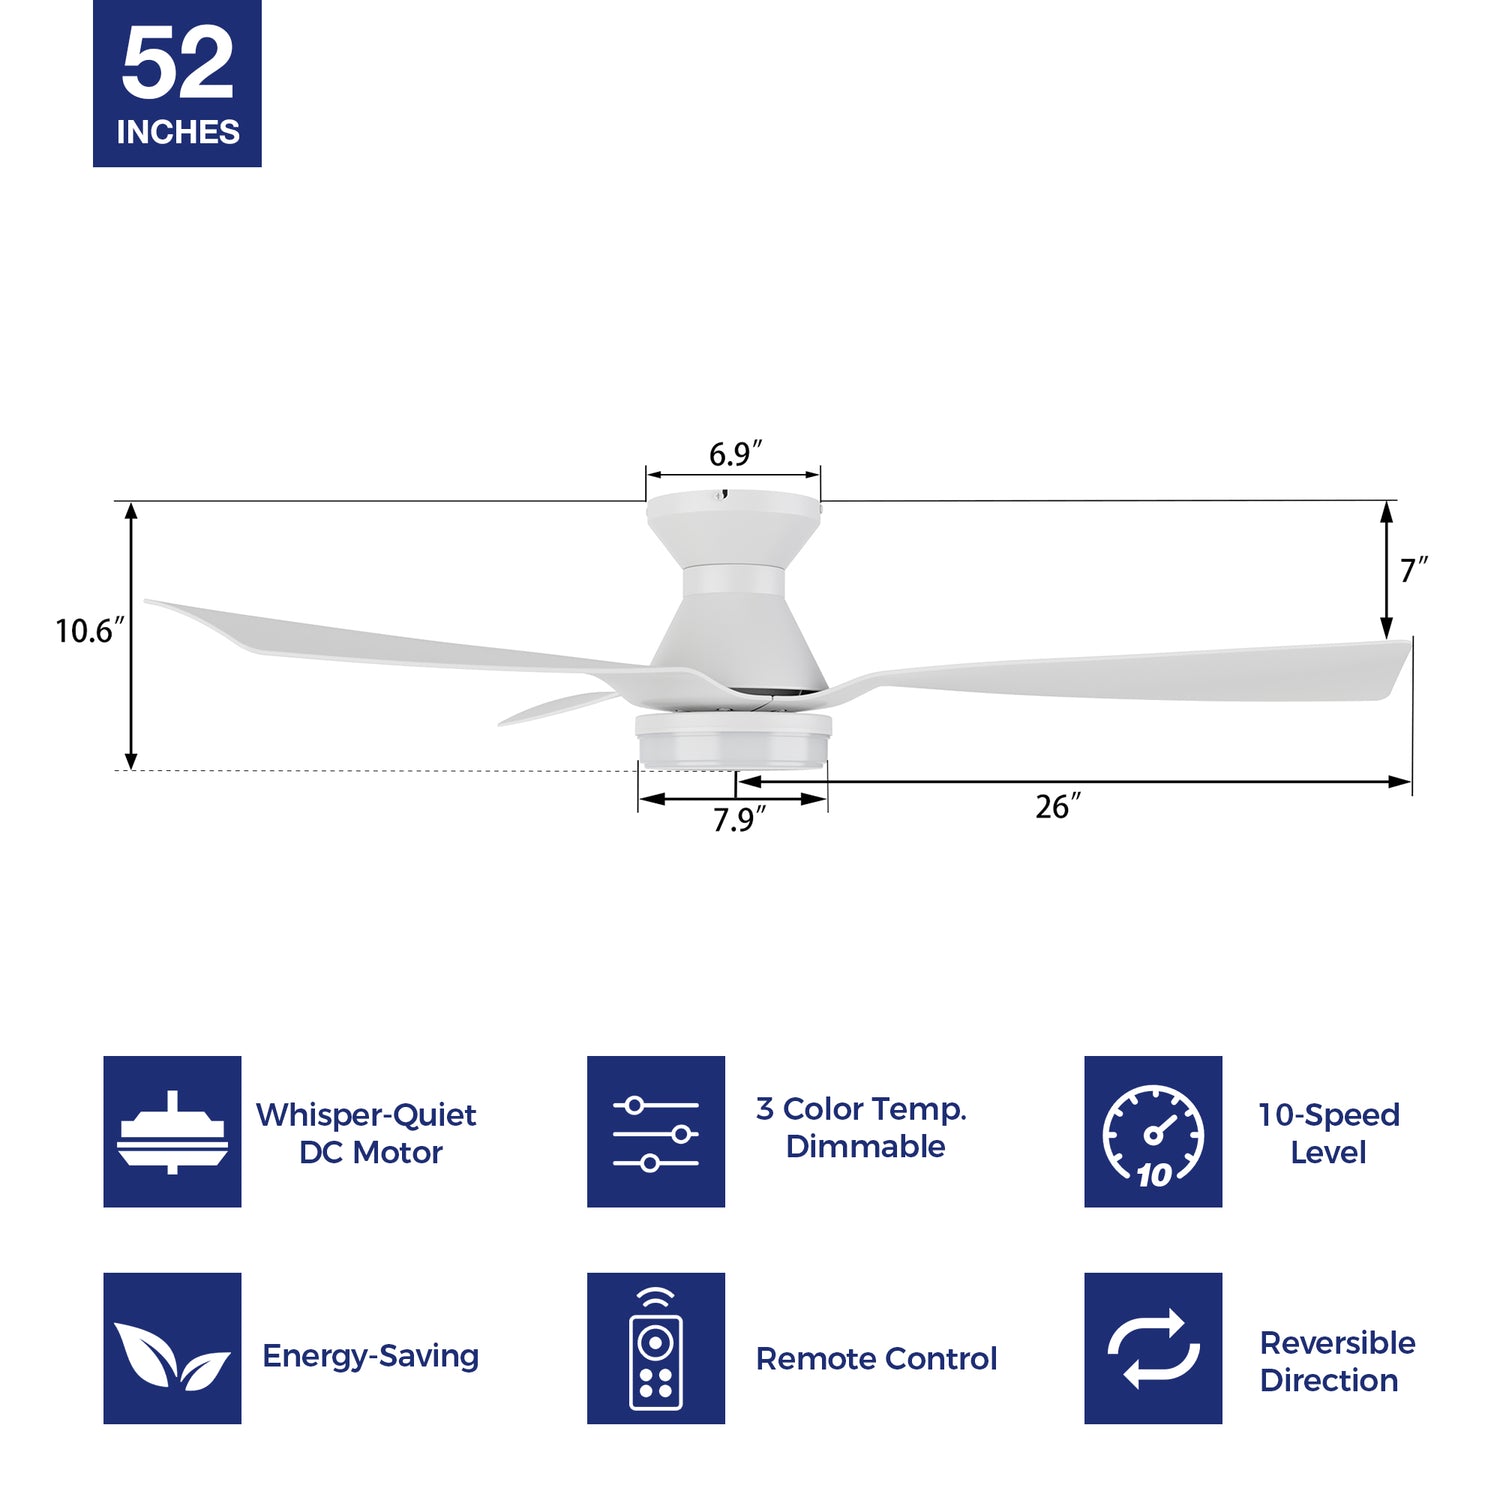 Revamp our space with a 52-inch white low-profile ceiling fan. Experience the ease of a remote-controlled 10-speed adjustable DC motor, 3-color temperature dimmable light, and an impressive 5070 CFM high air volume. Relish in whisper-quiet cooling thanks to the energy-efficient DC motor. The fan&